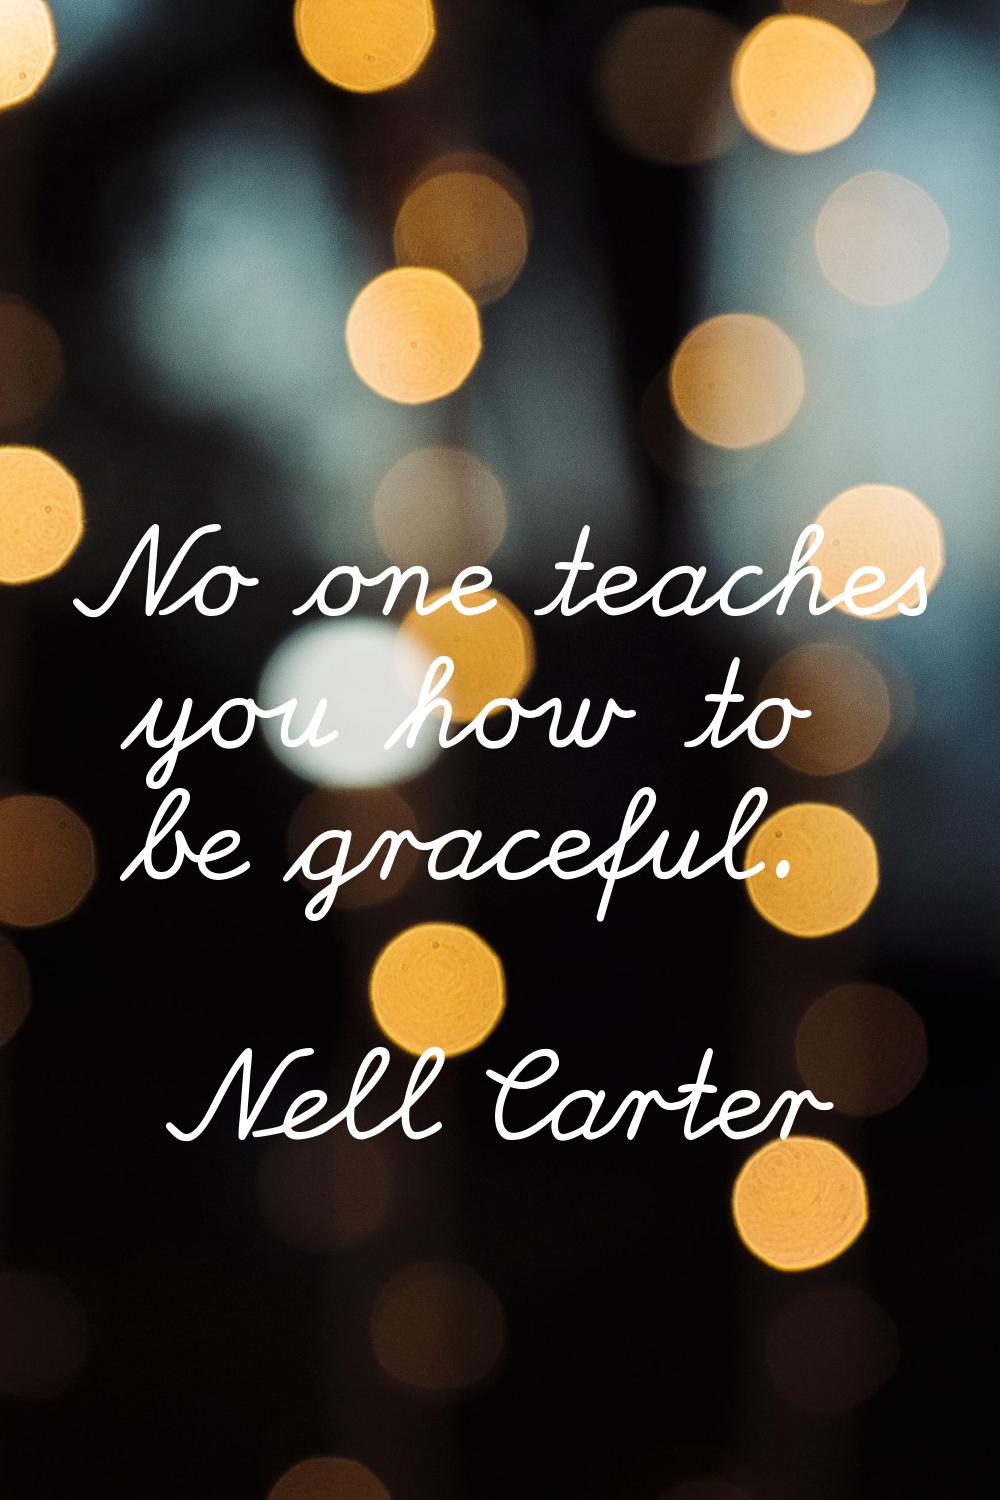 No one teaches you how to be graceful.